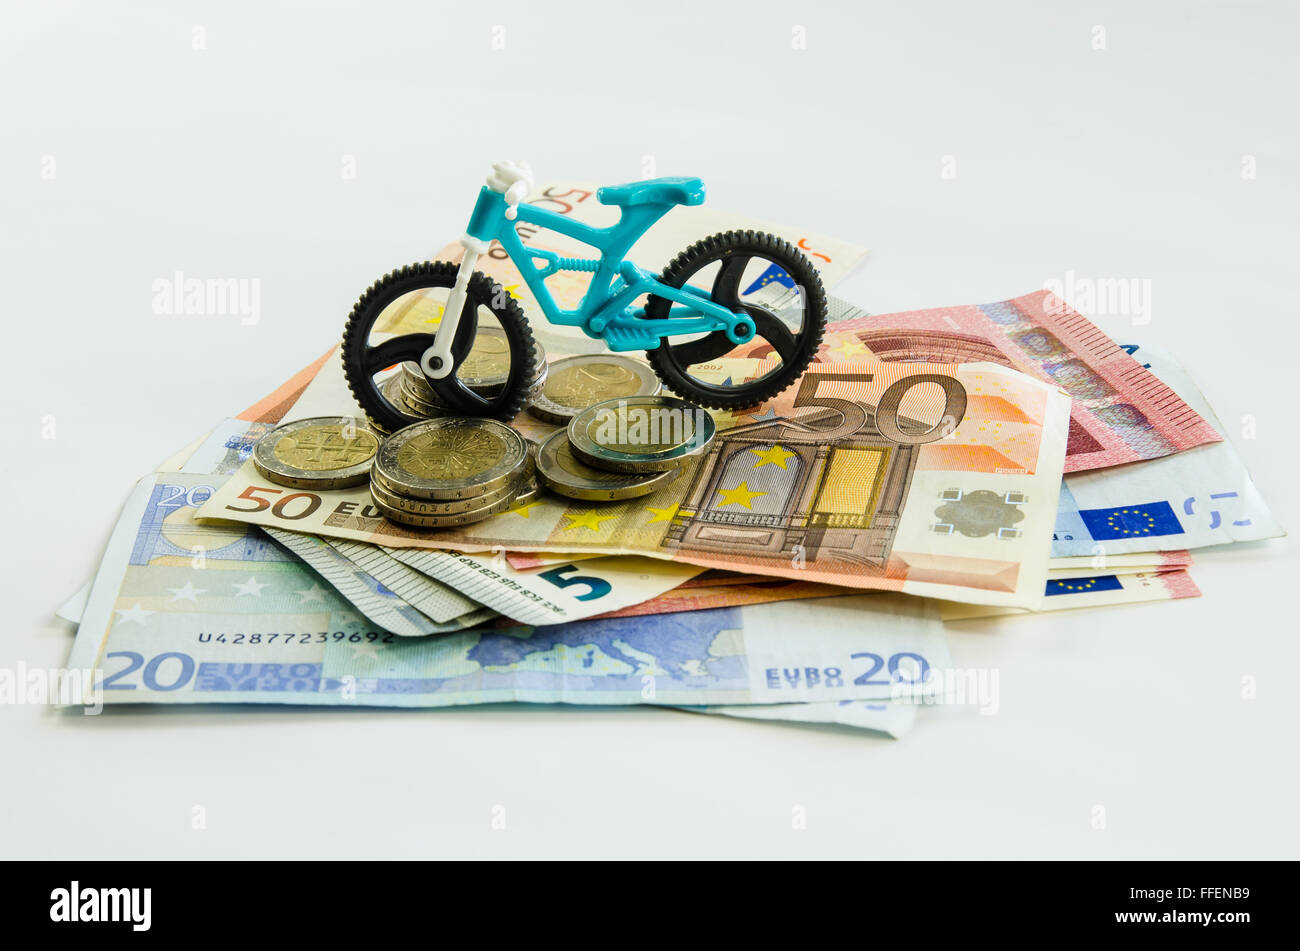 toy bicycle, banknotes and coins Stock Photo